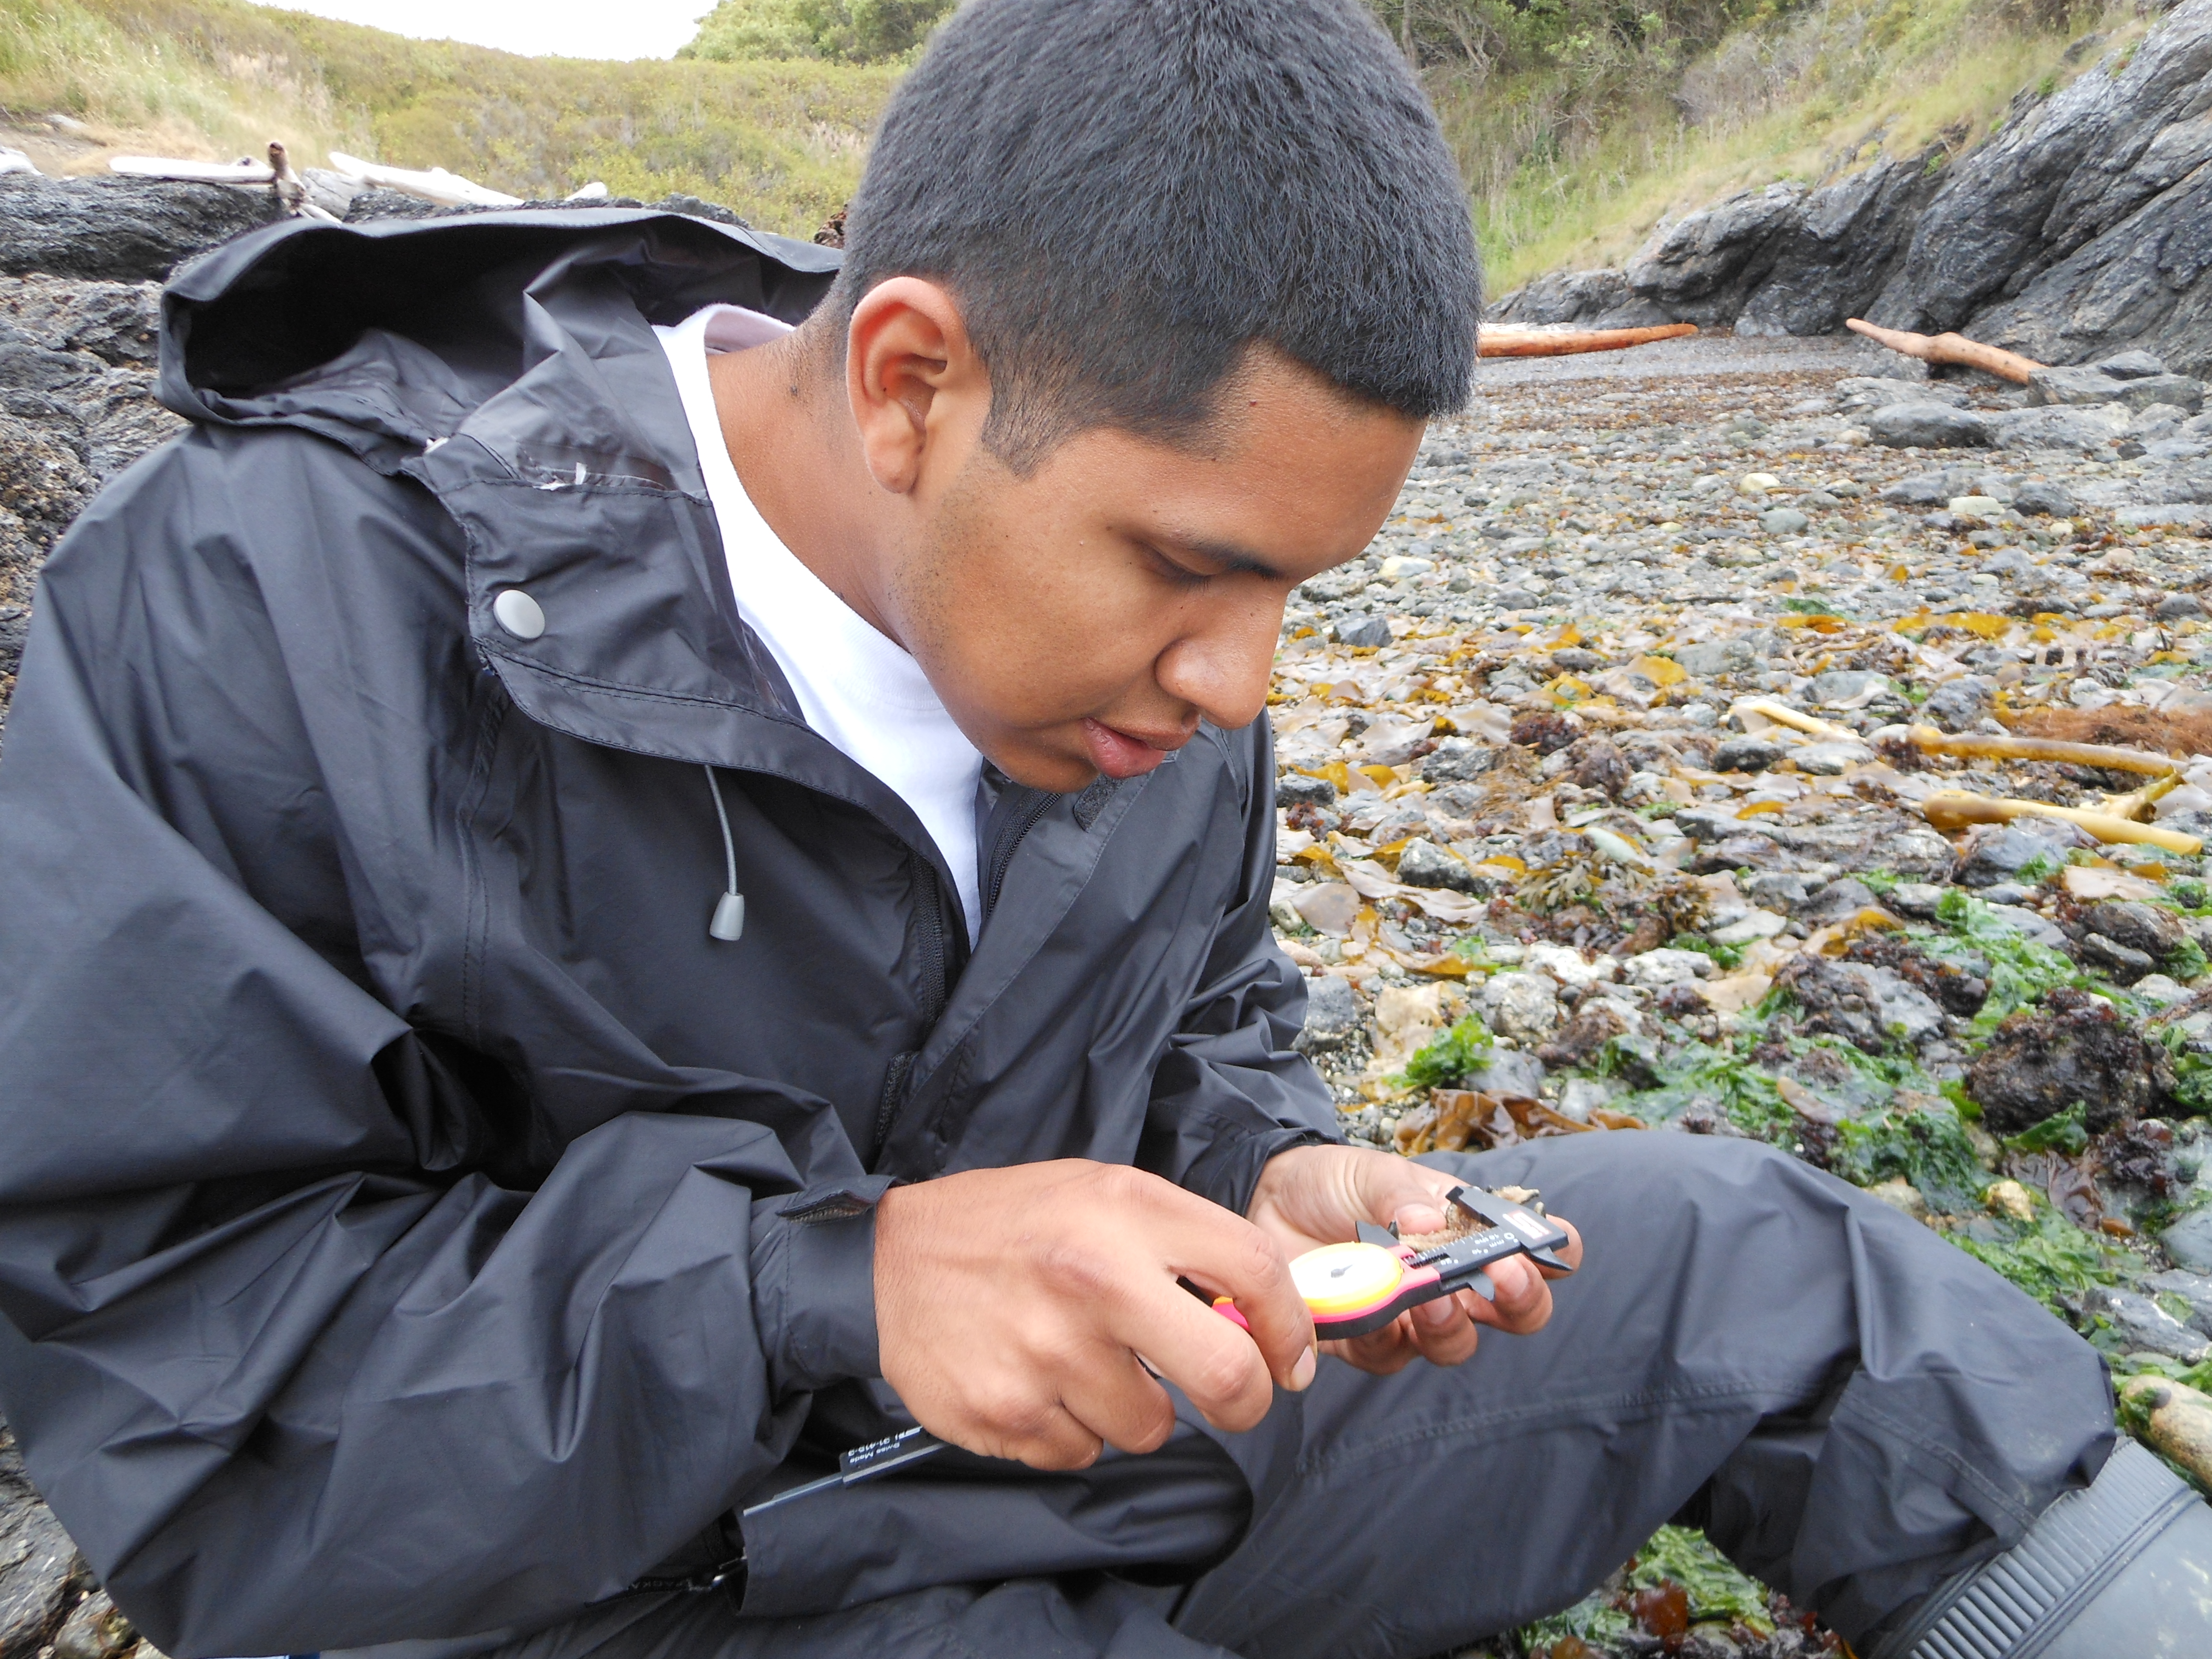 Students in the field doing research